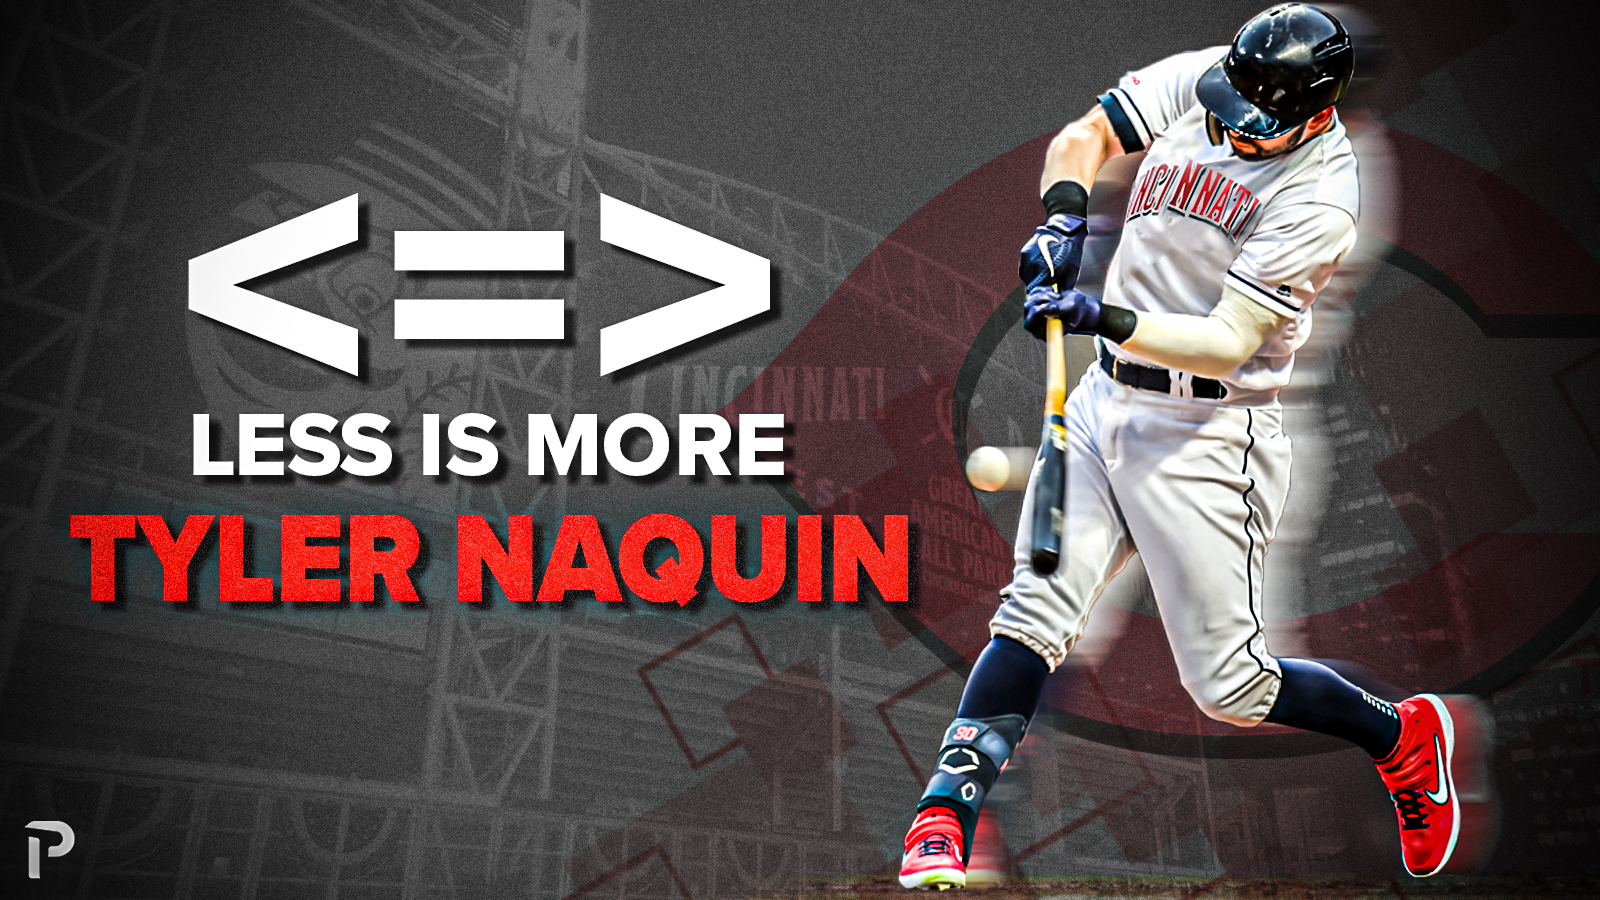 Less is More for Tyler Naquin